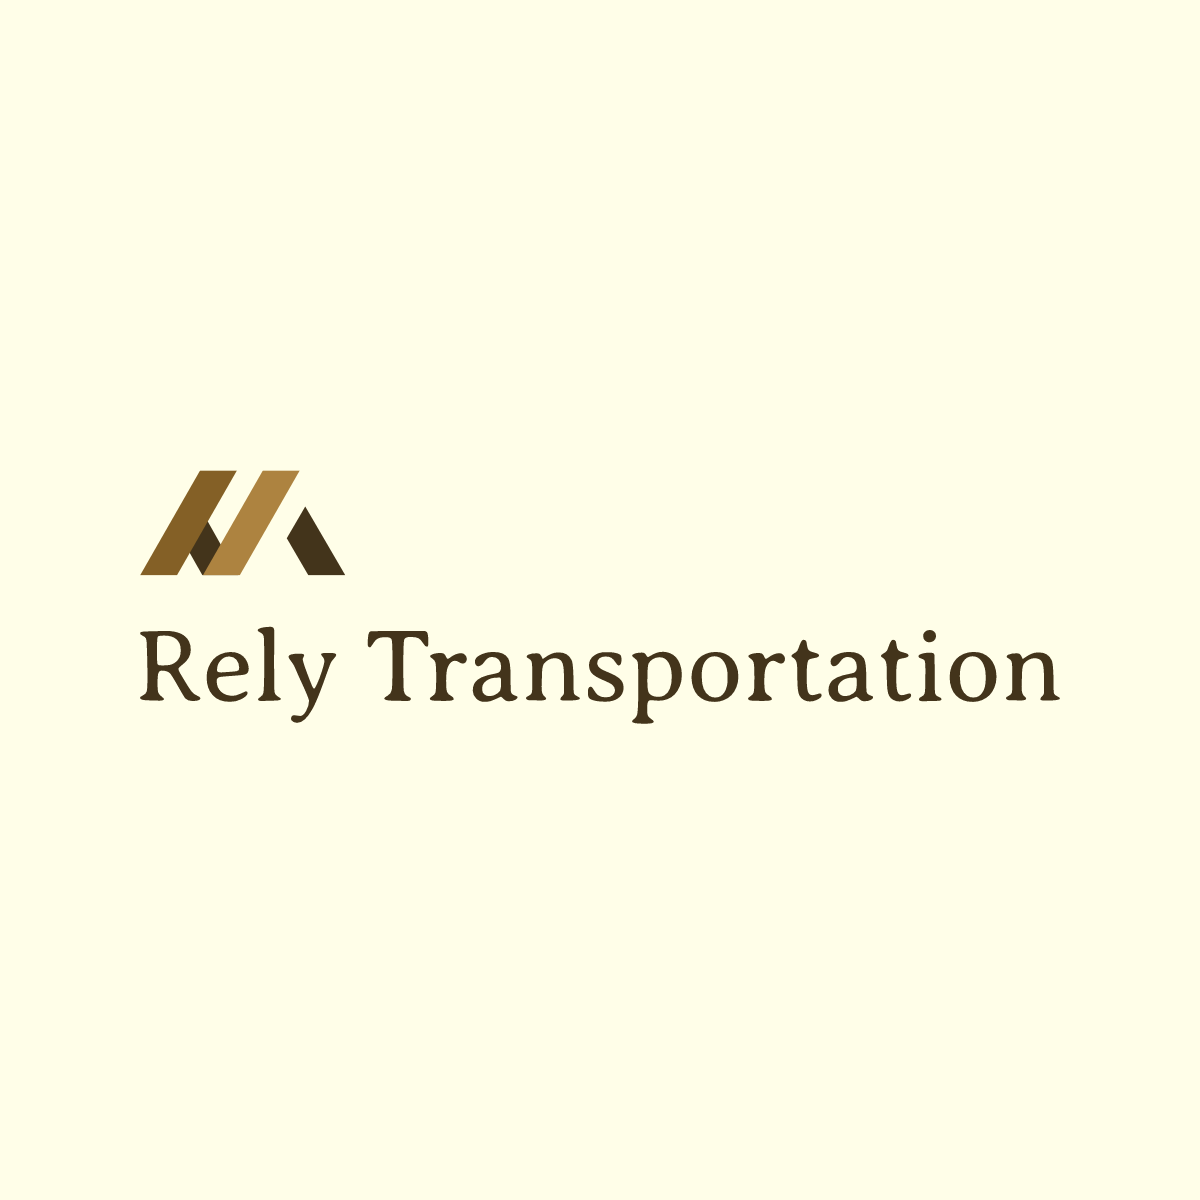 Rely Transportation